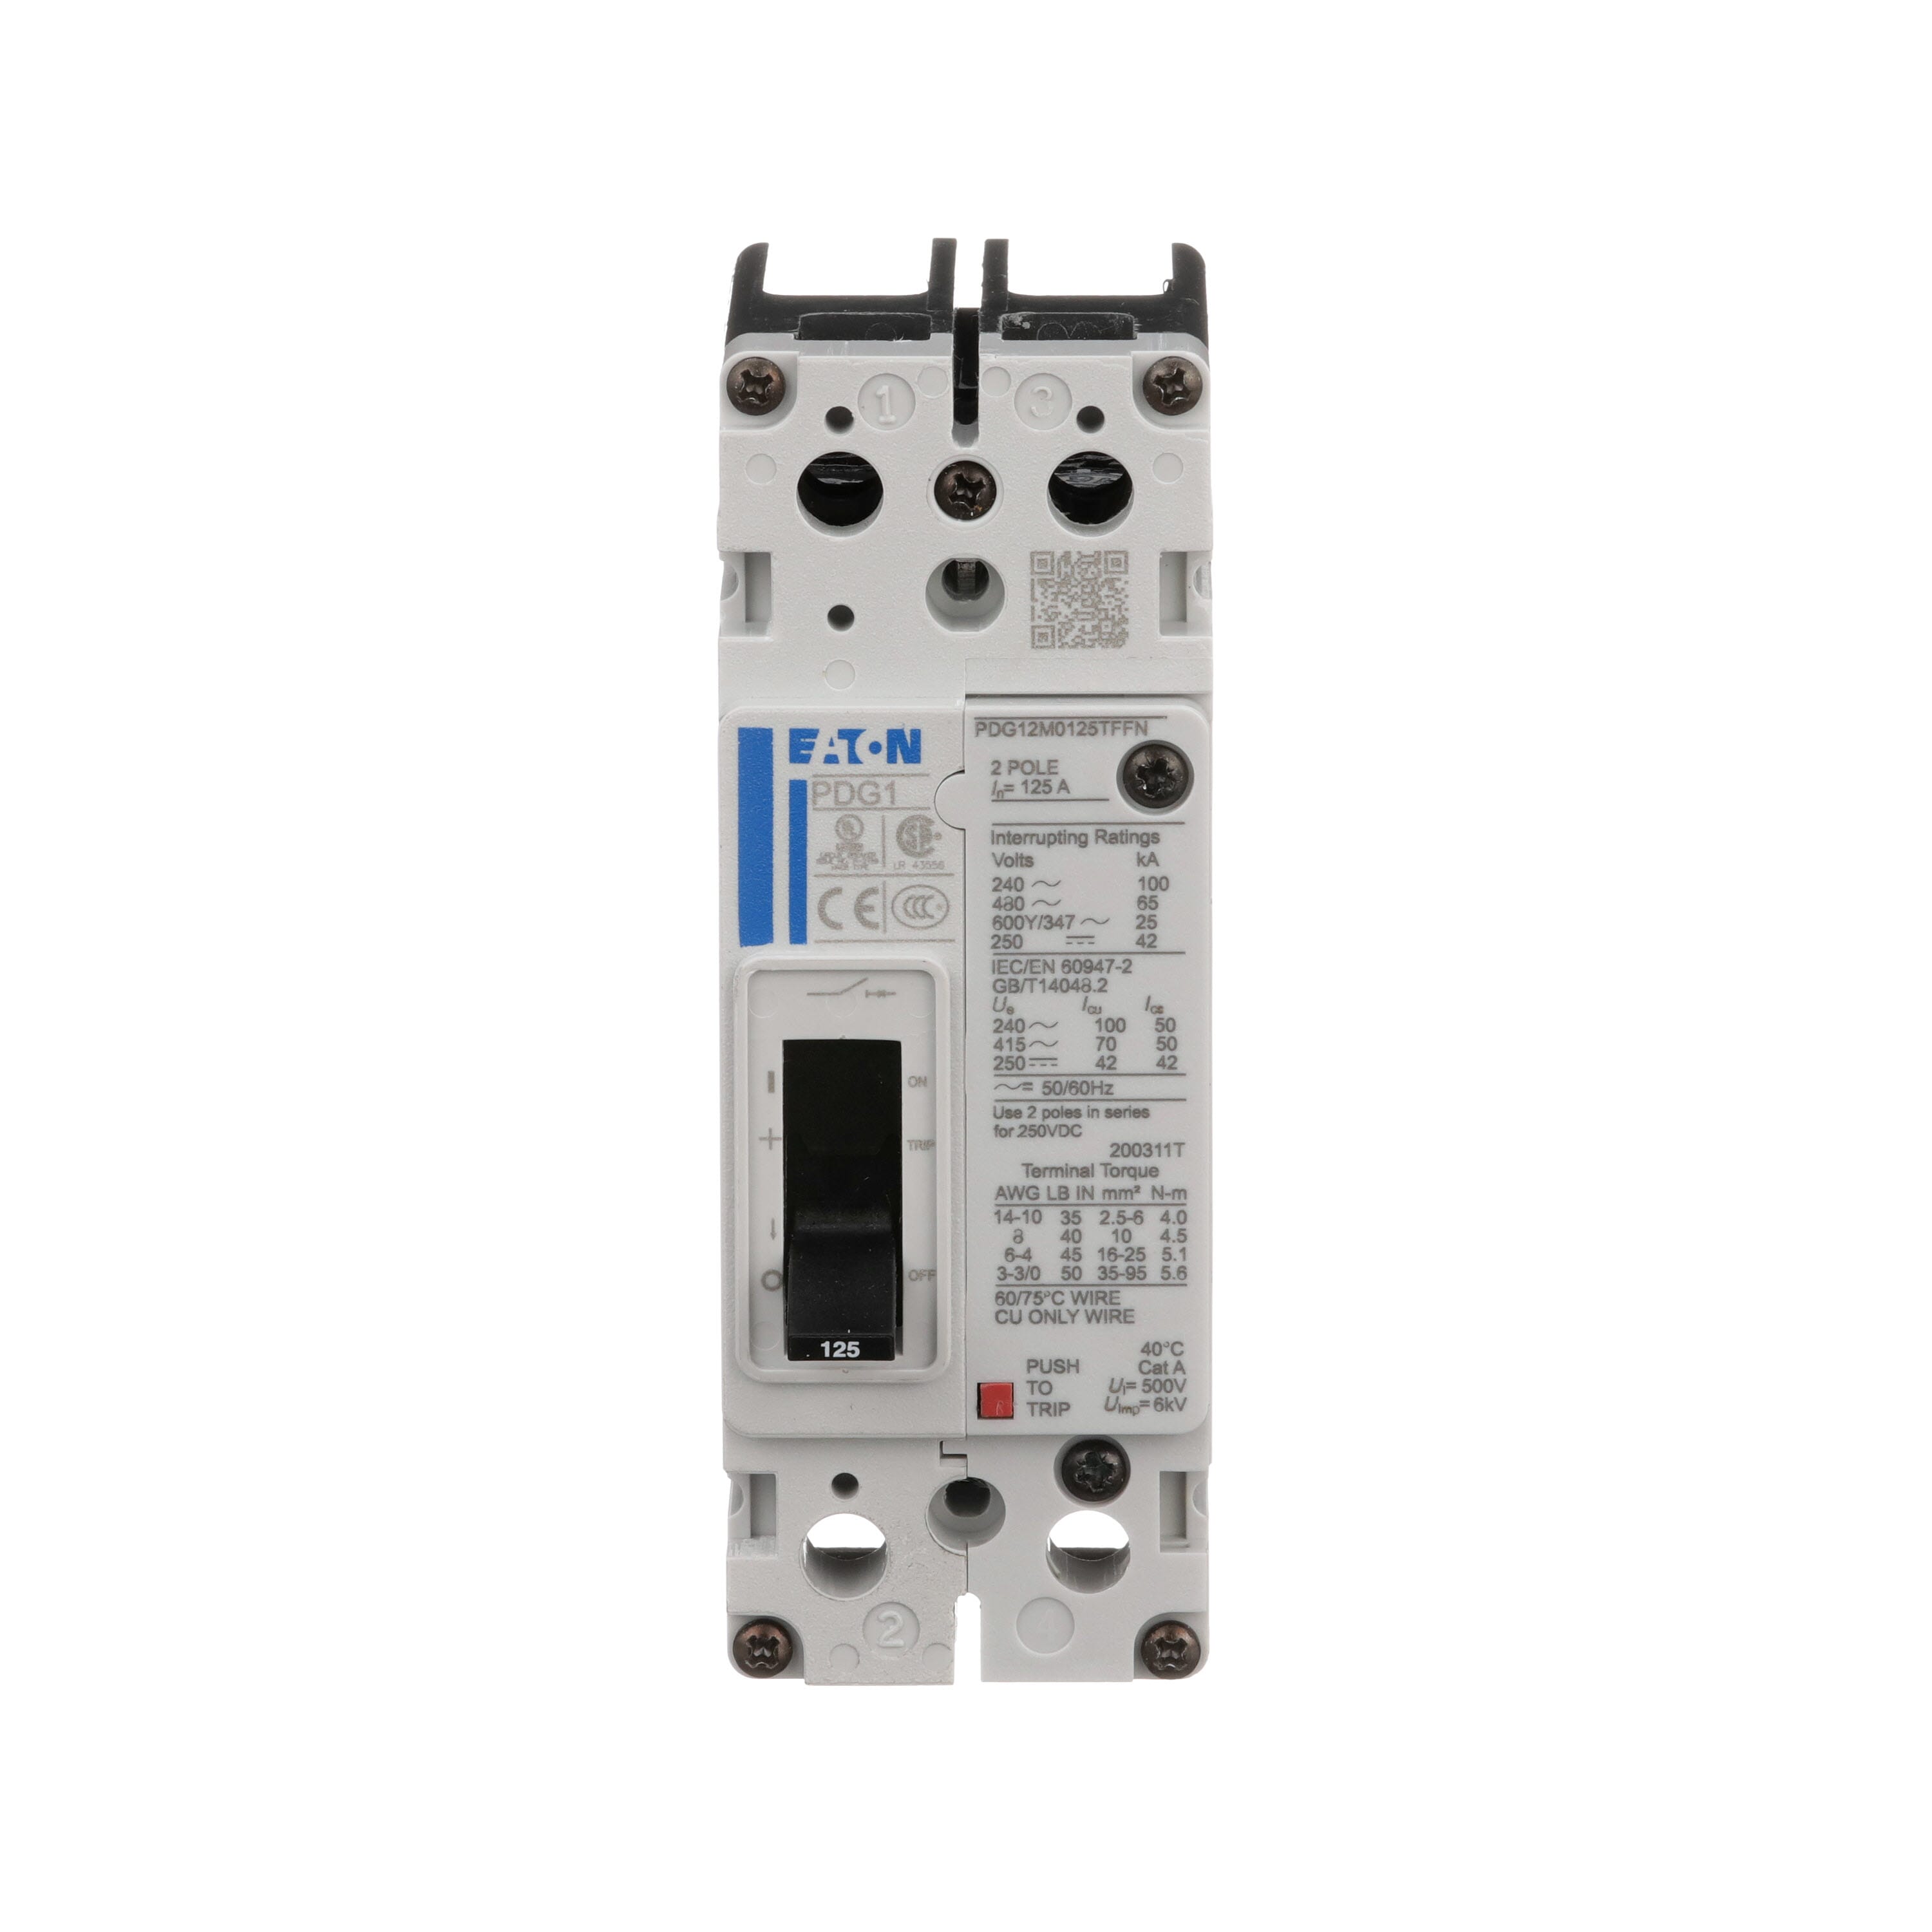 Series C IEC Rotary Handle Mechanism For Molded Case Circuit Breakers Electrical 